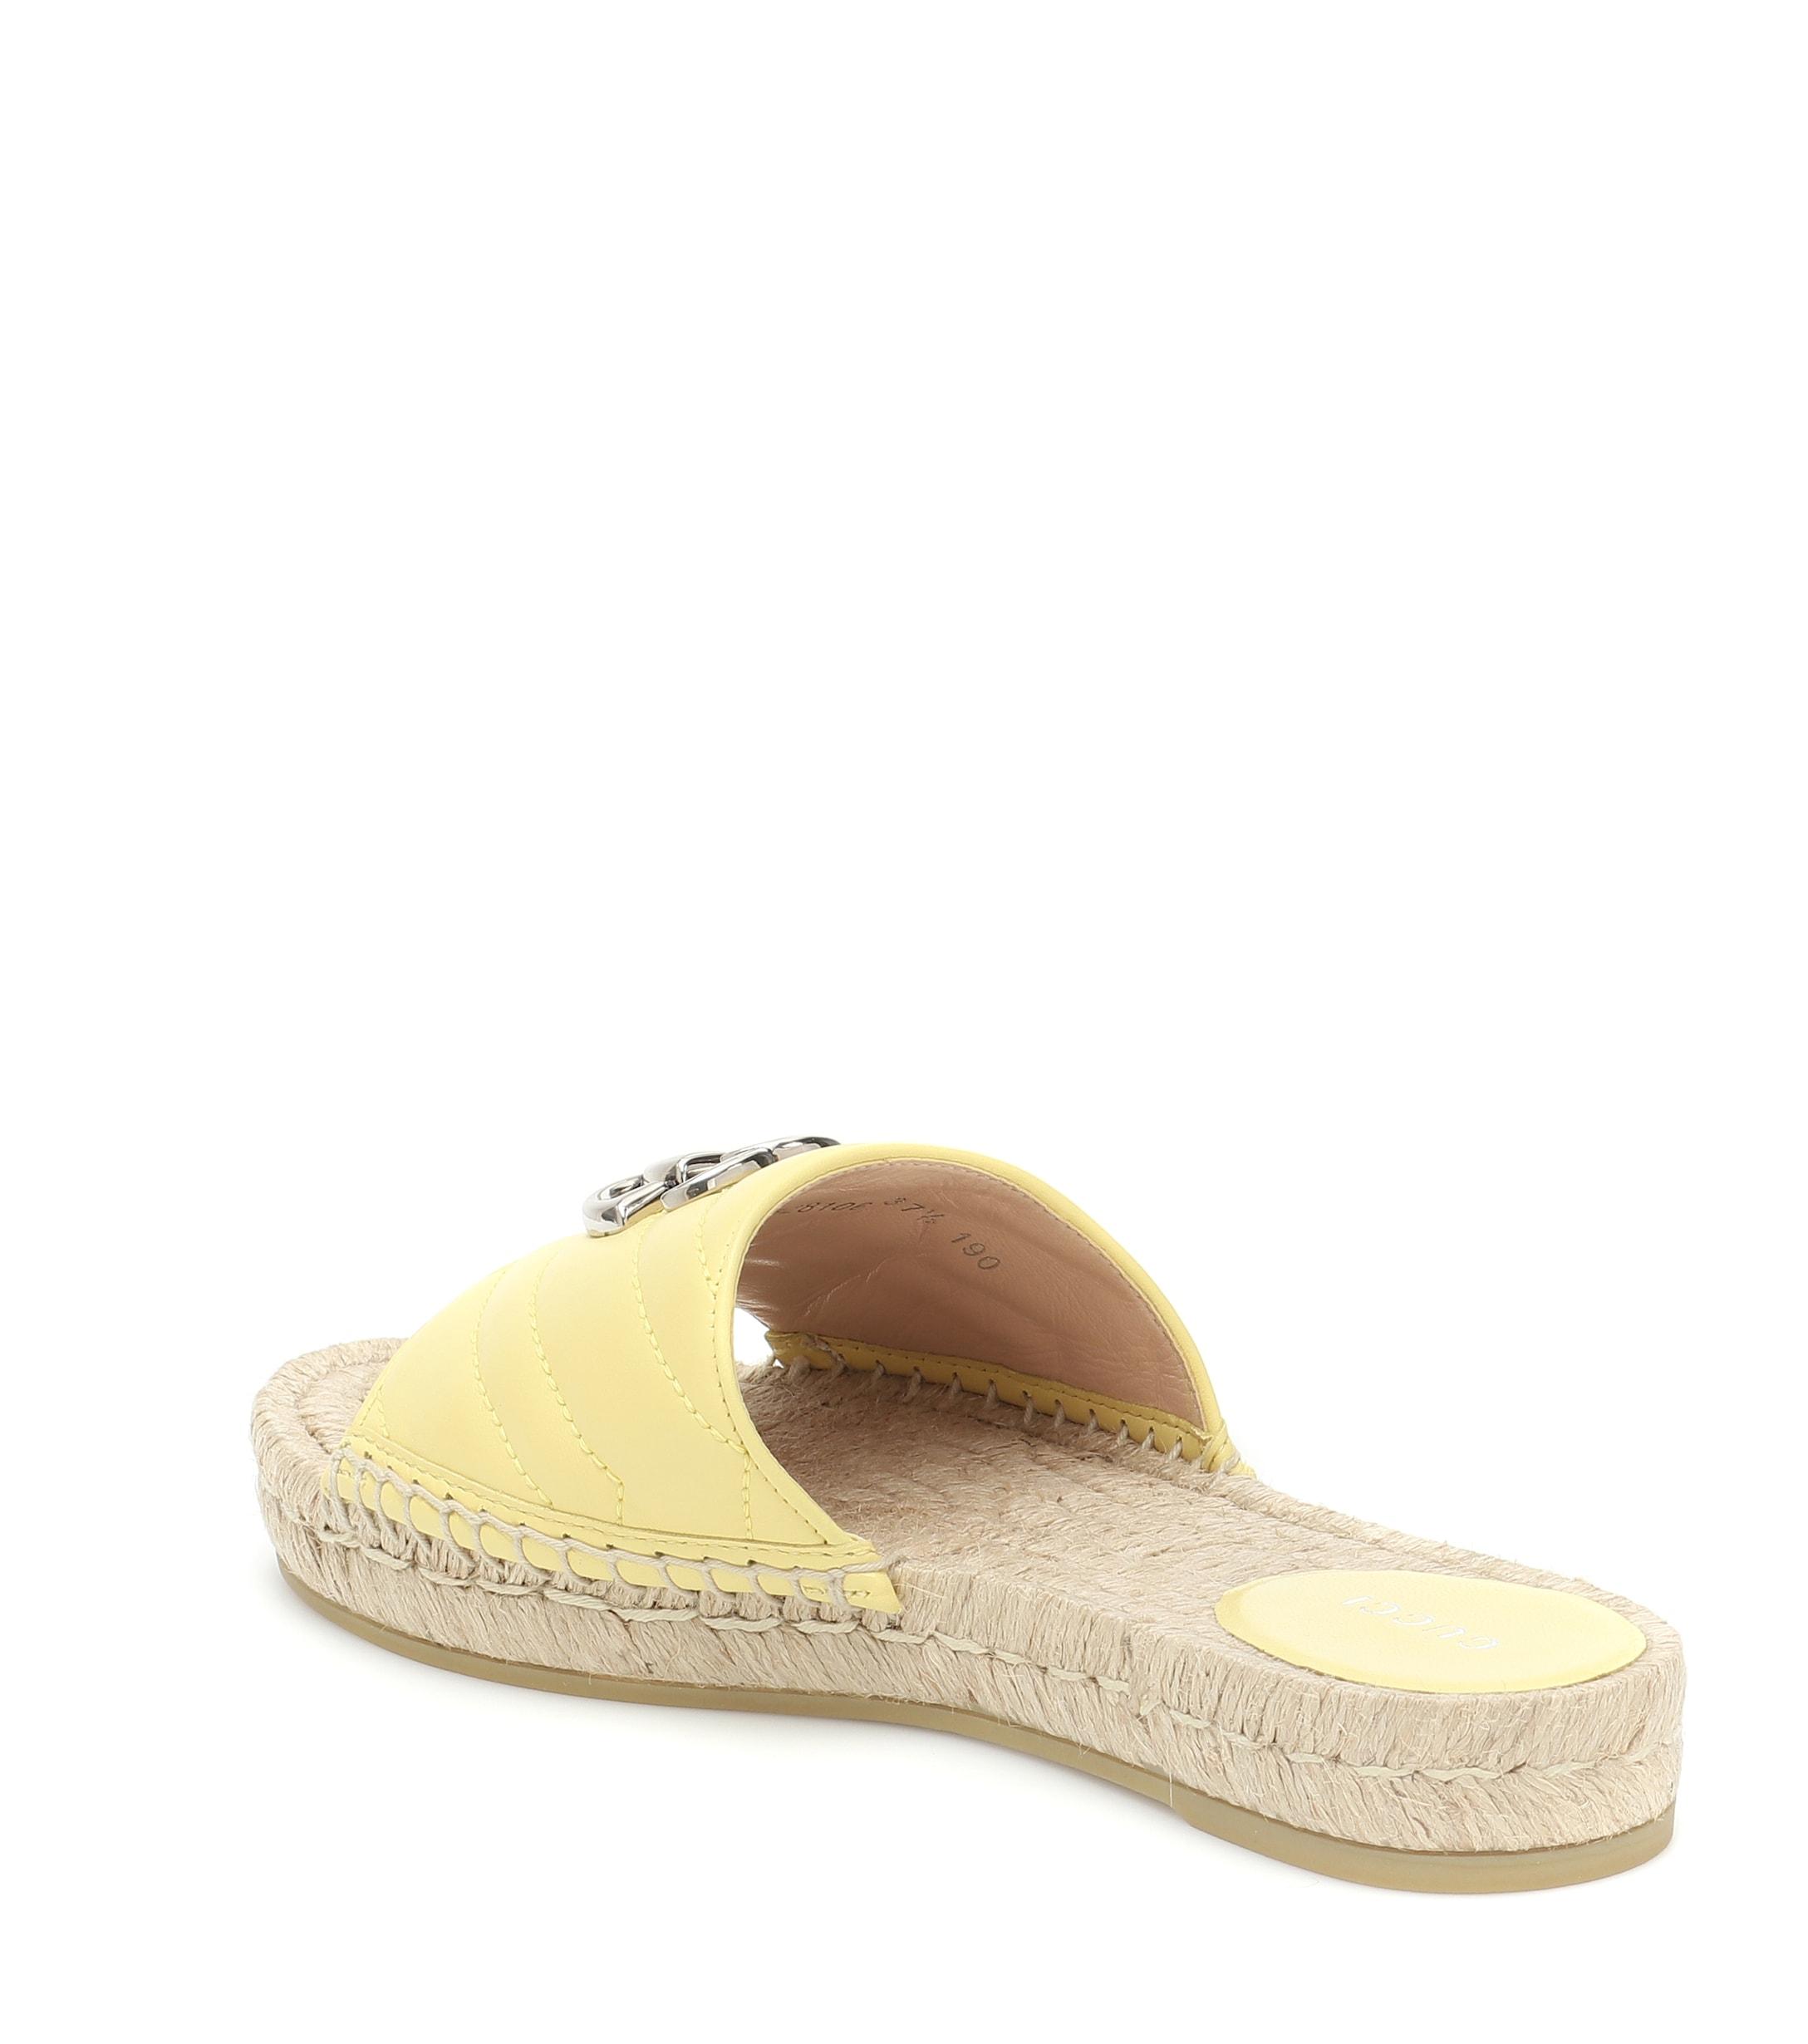 Gucci Pilar Leather Espadrille Slides in Yellow - Lyst